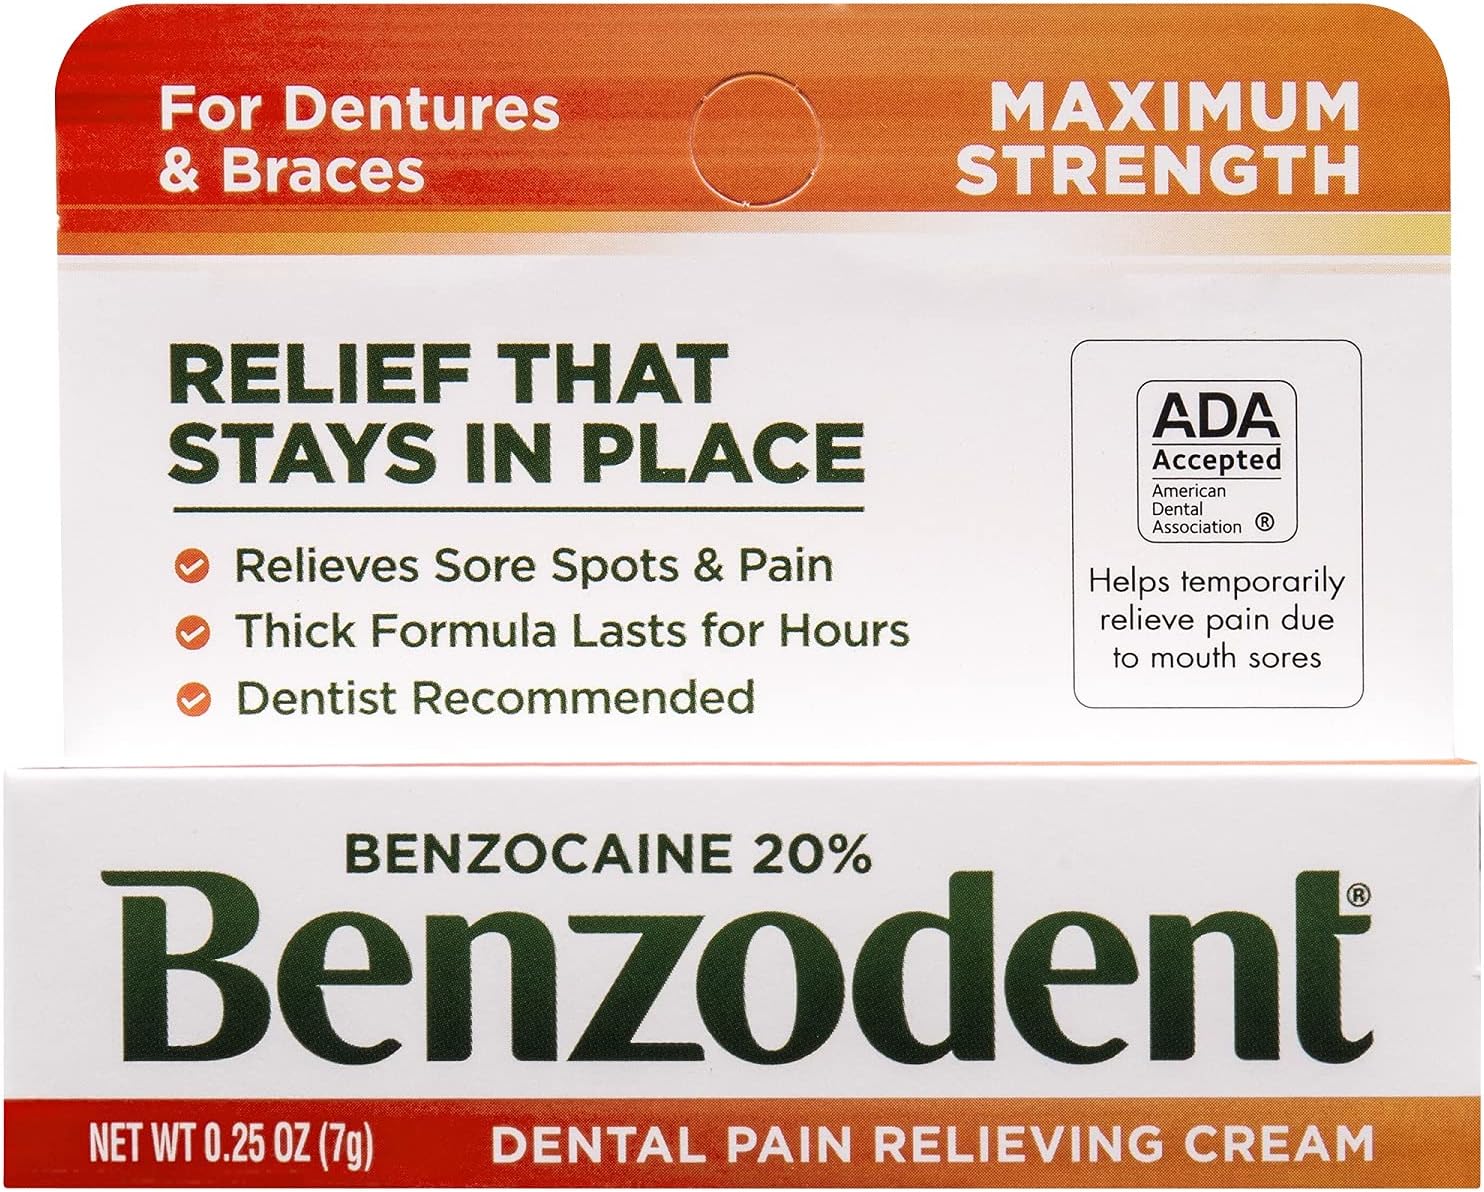 0.25-Oz Benzodent Dental Pain Relieving Cream $1.81 w/ S&S + Free Shipping w/ Prime or on orders over $35